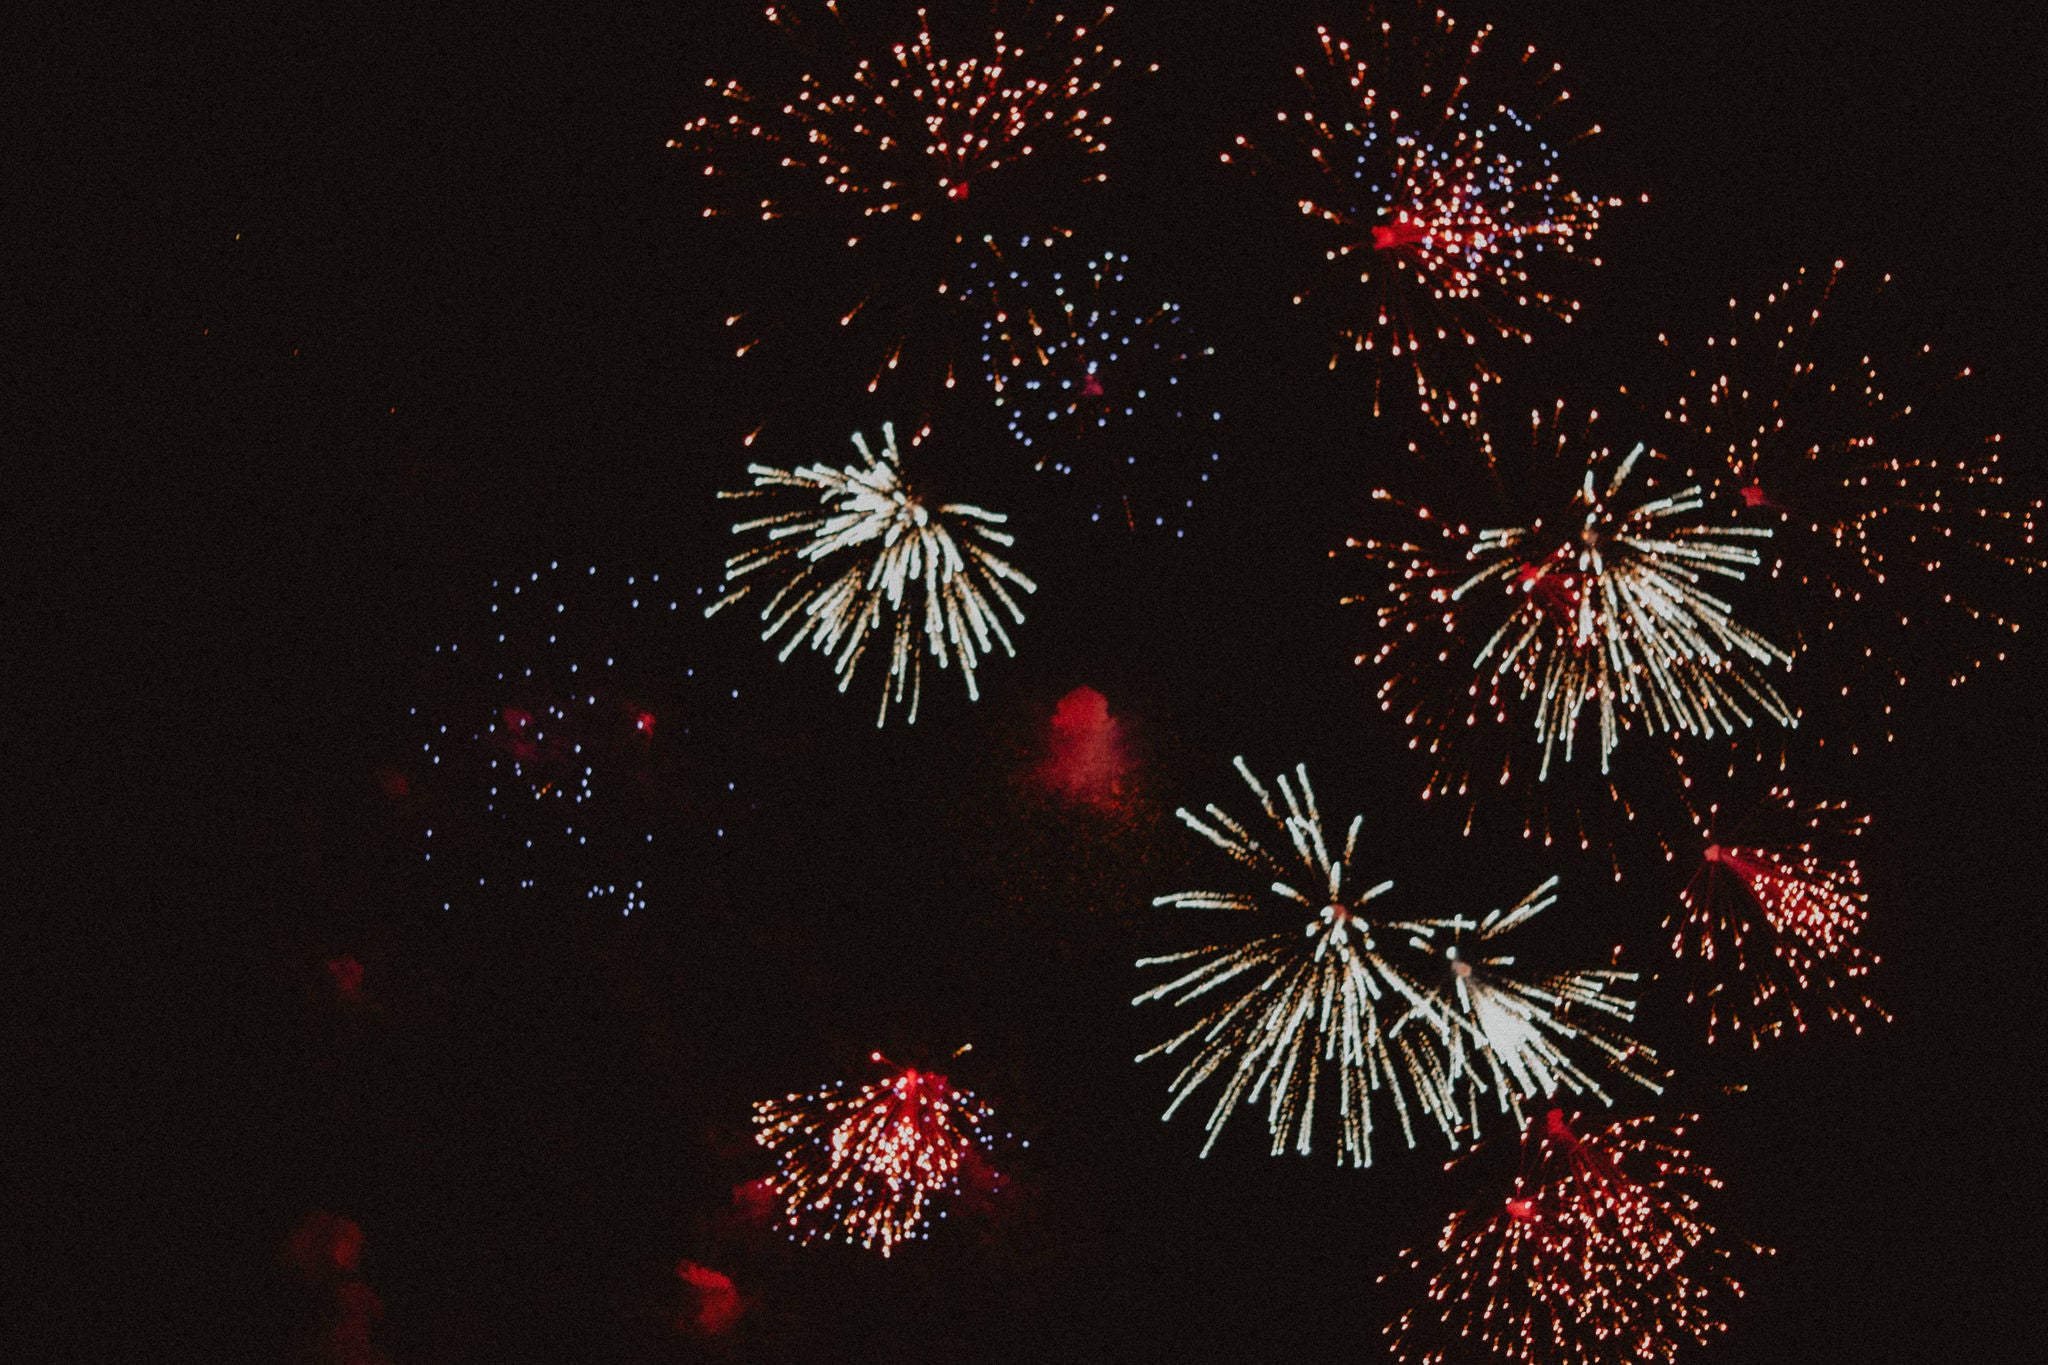 A sky full of various fireworks, sparkling in red and white